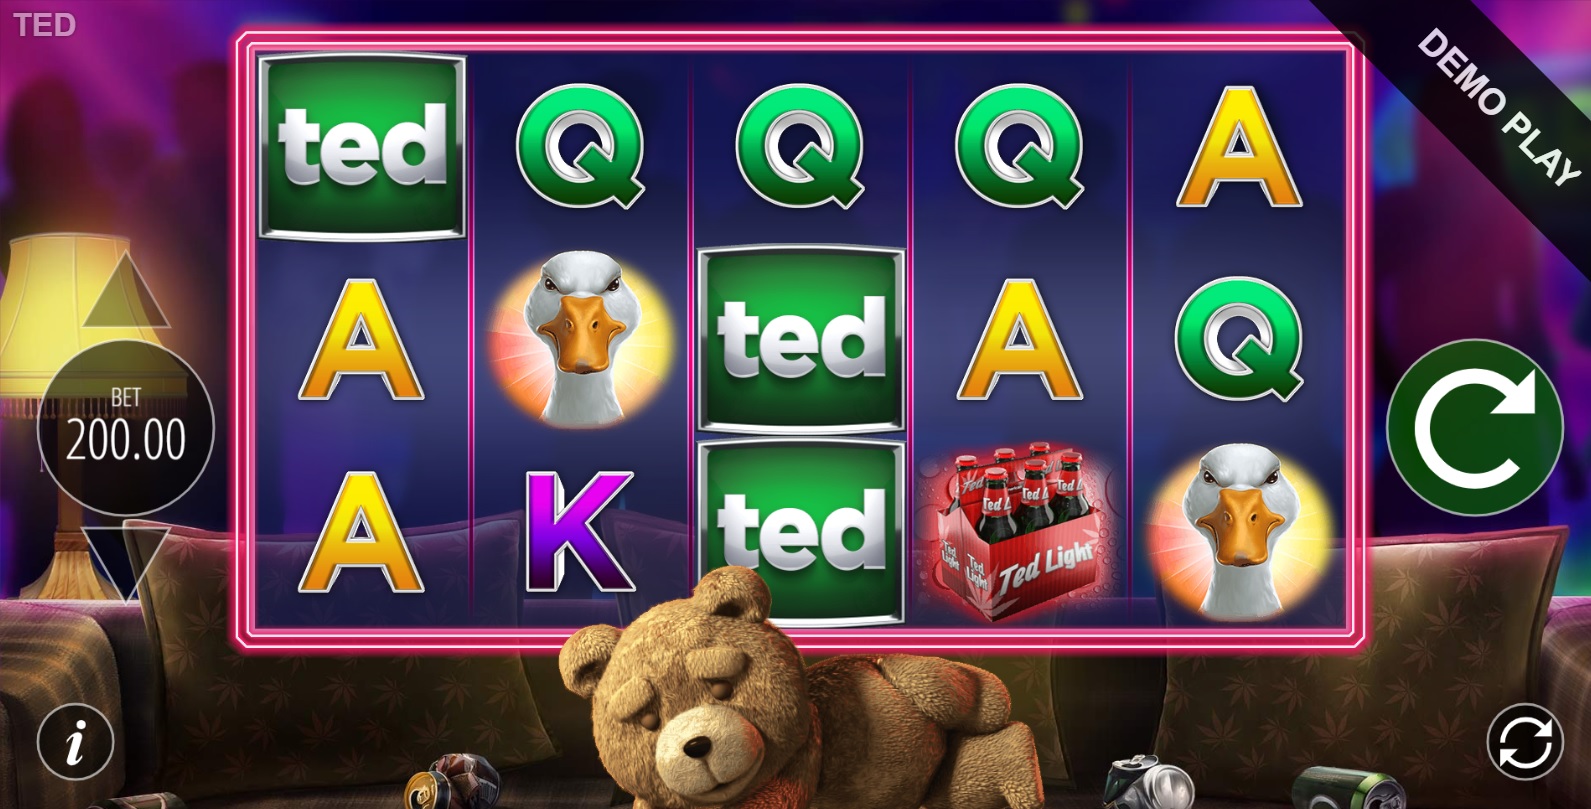 Ted slot is becoming more popular